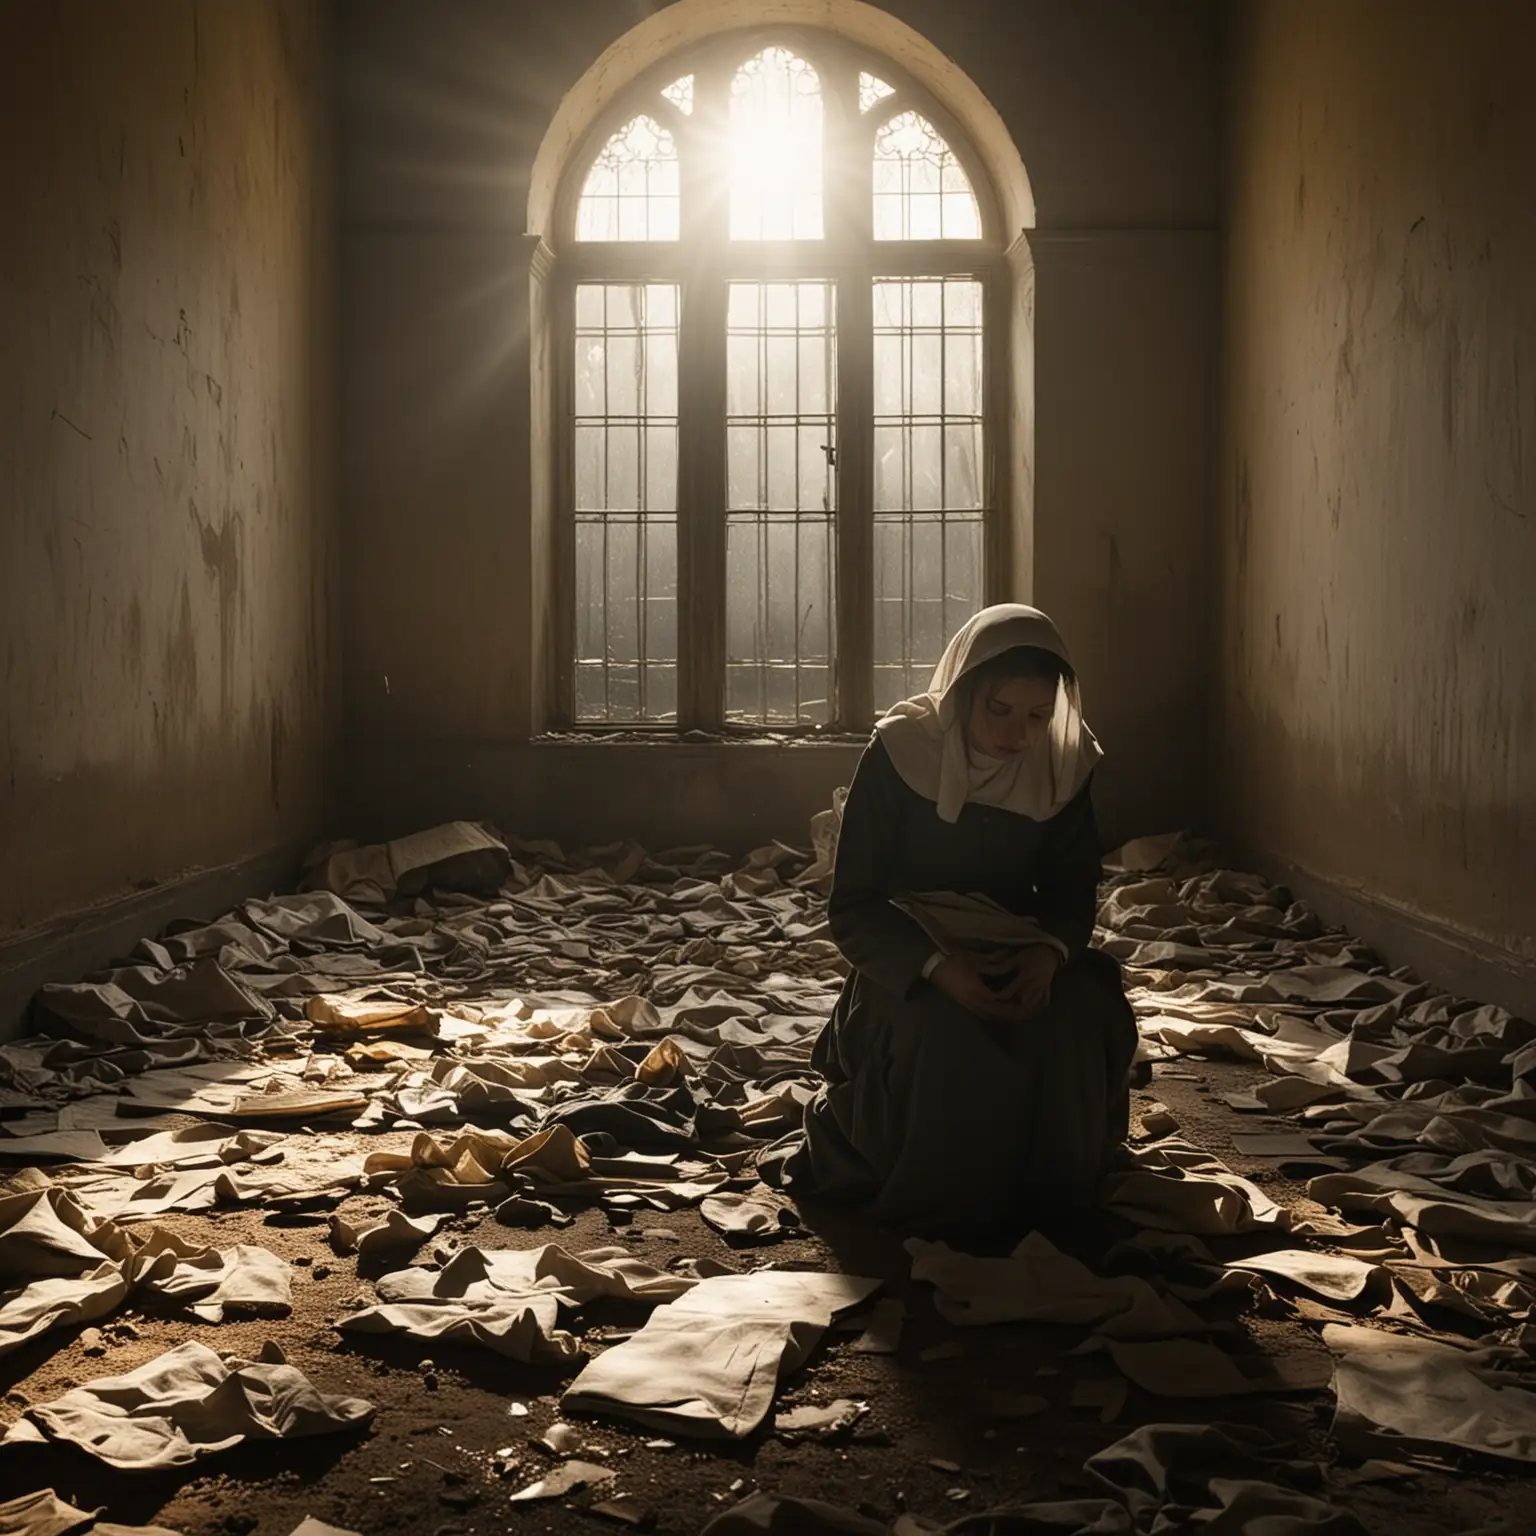 Woman Exiting Haunted Convent in Morning Sunlight